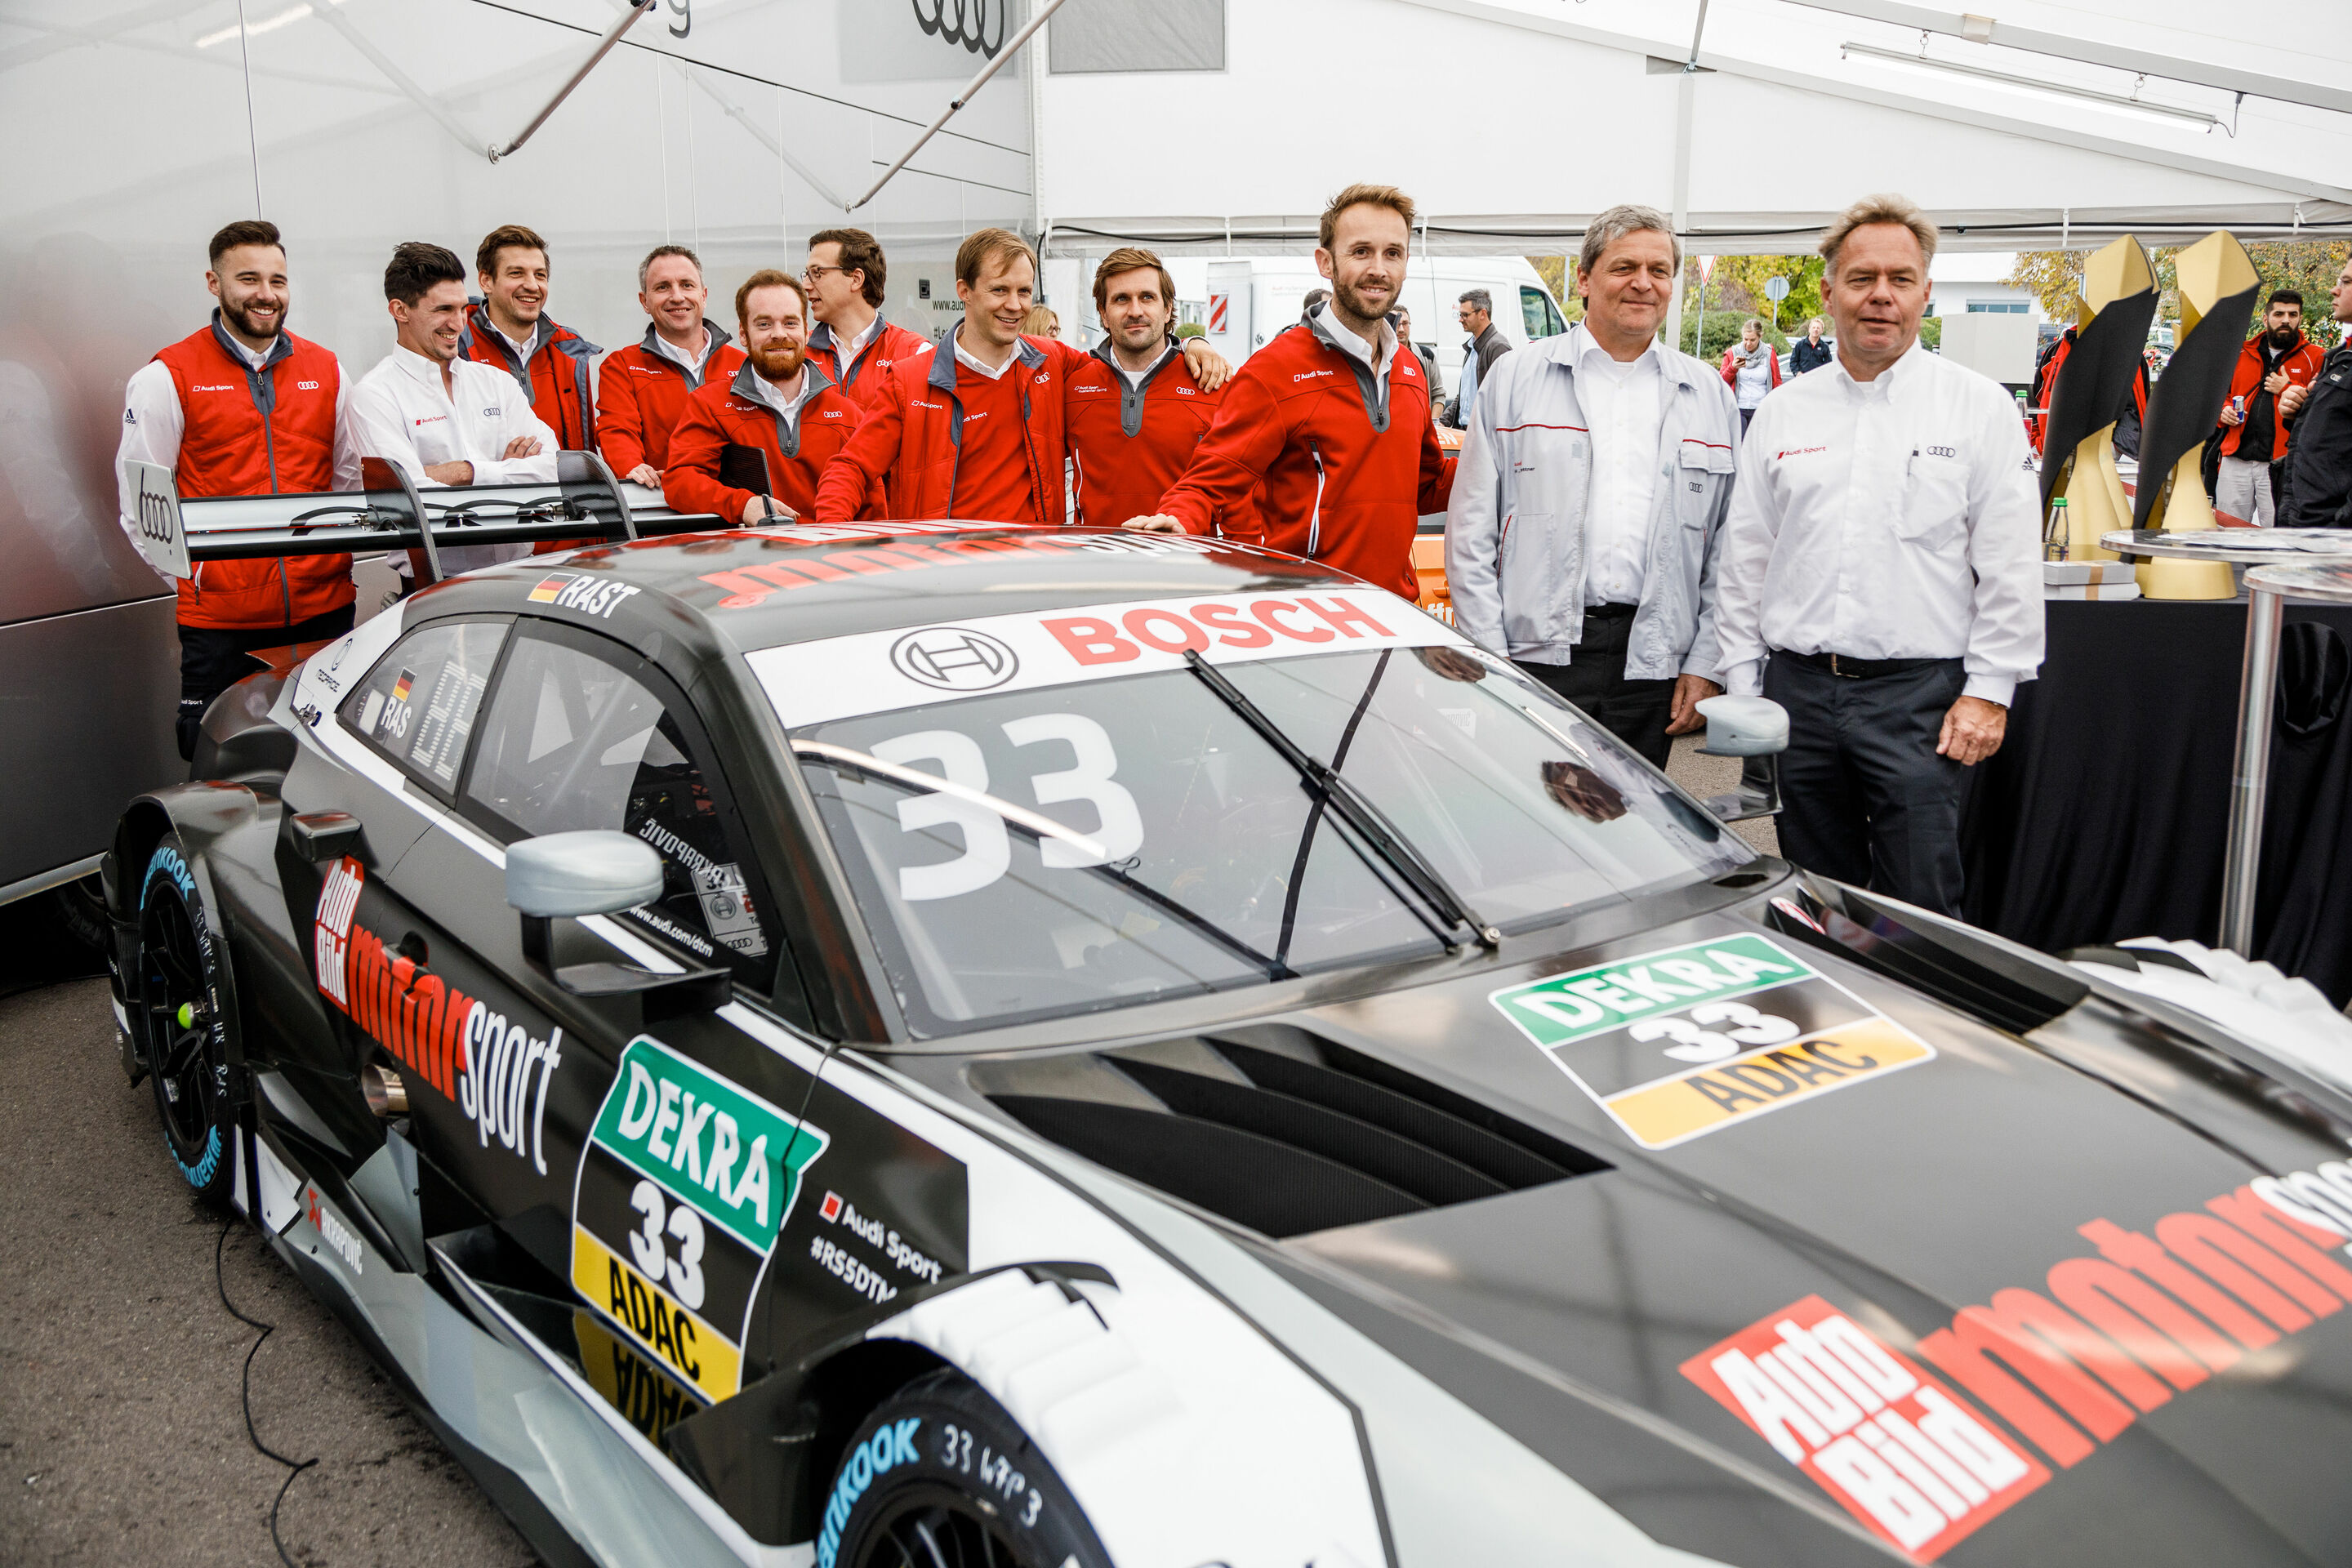 Employees and fans at Audi Forum Neckarsulm